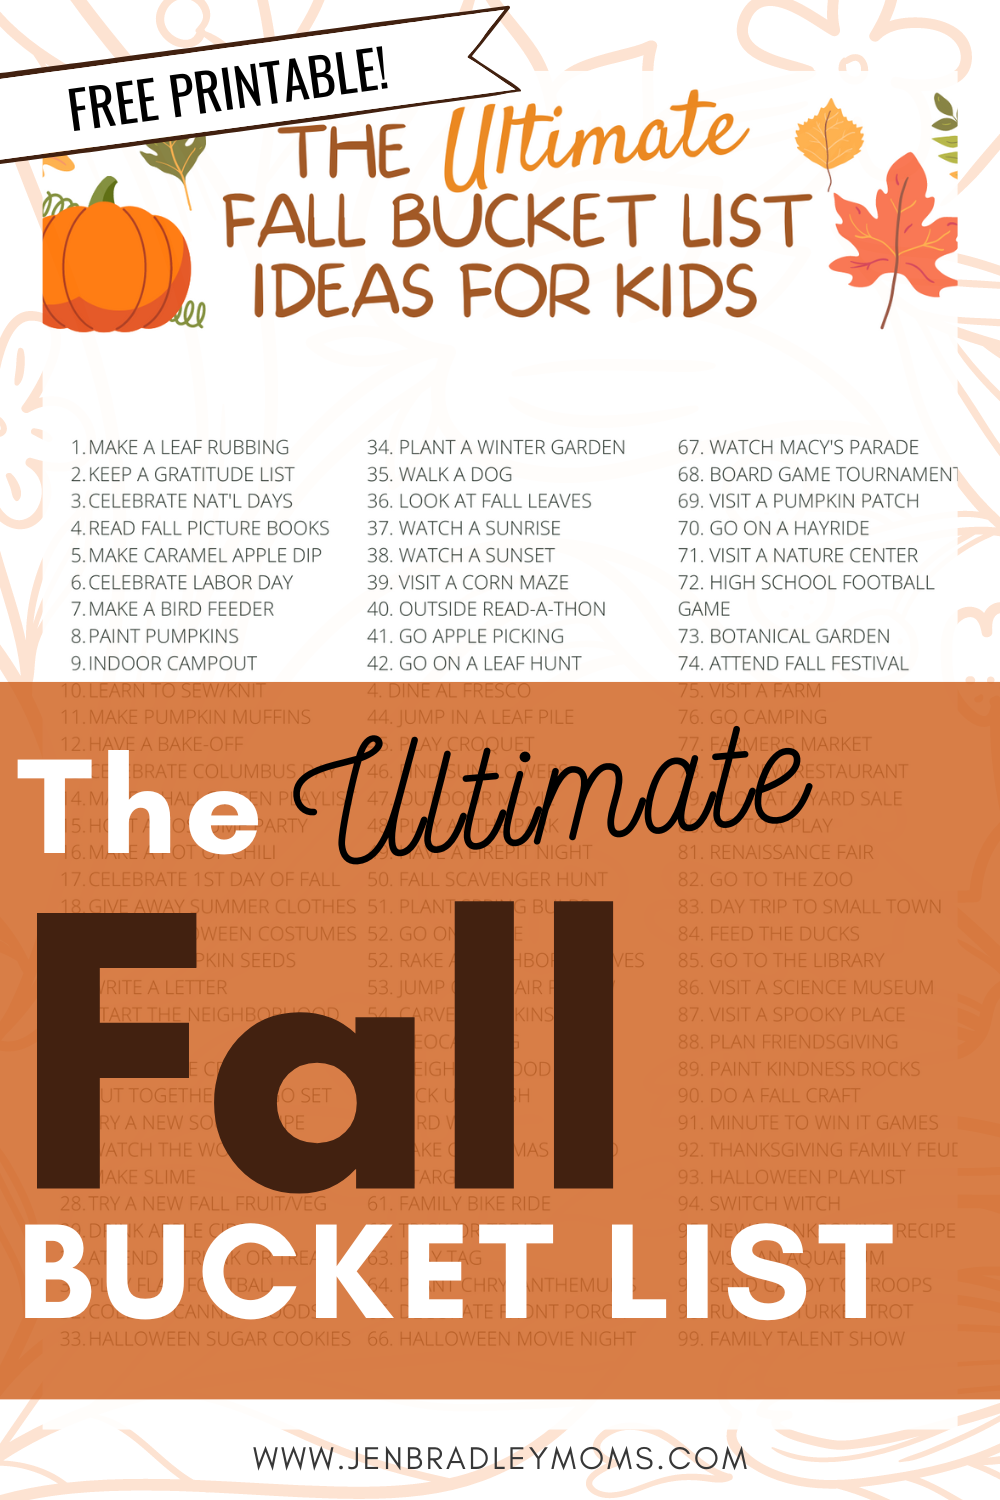 Fall Bucket List - 125 Awesome Things to Do With Your Kids This Fall